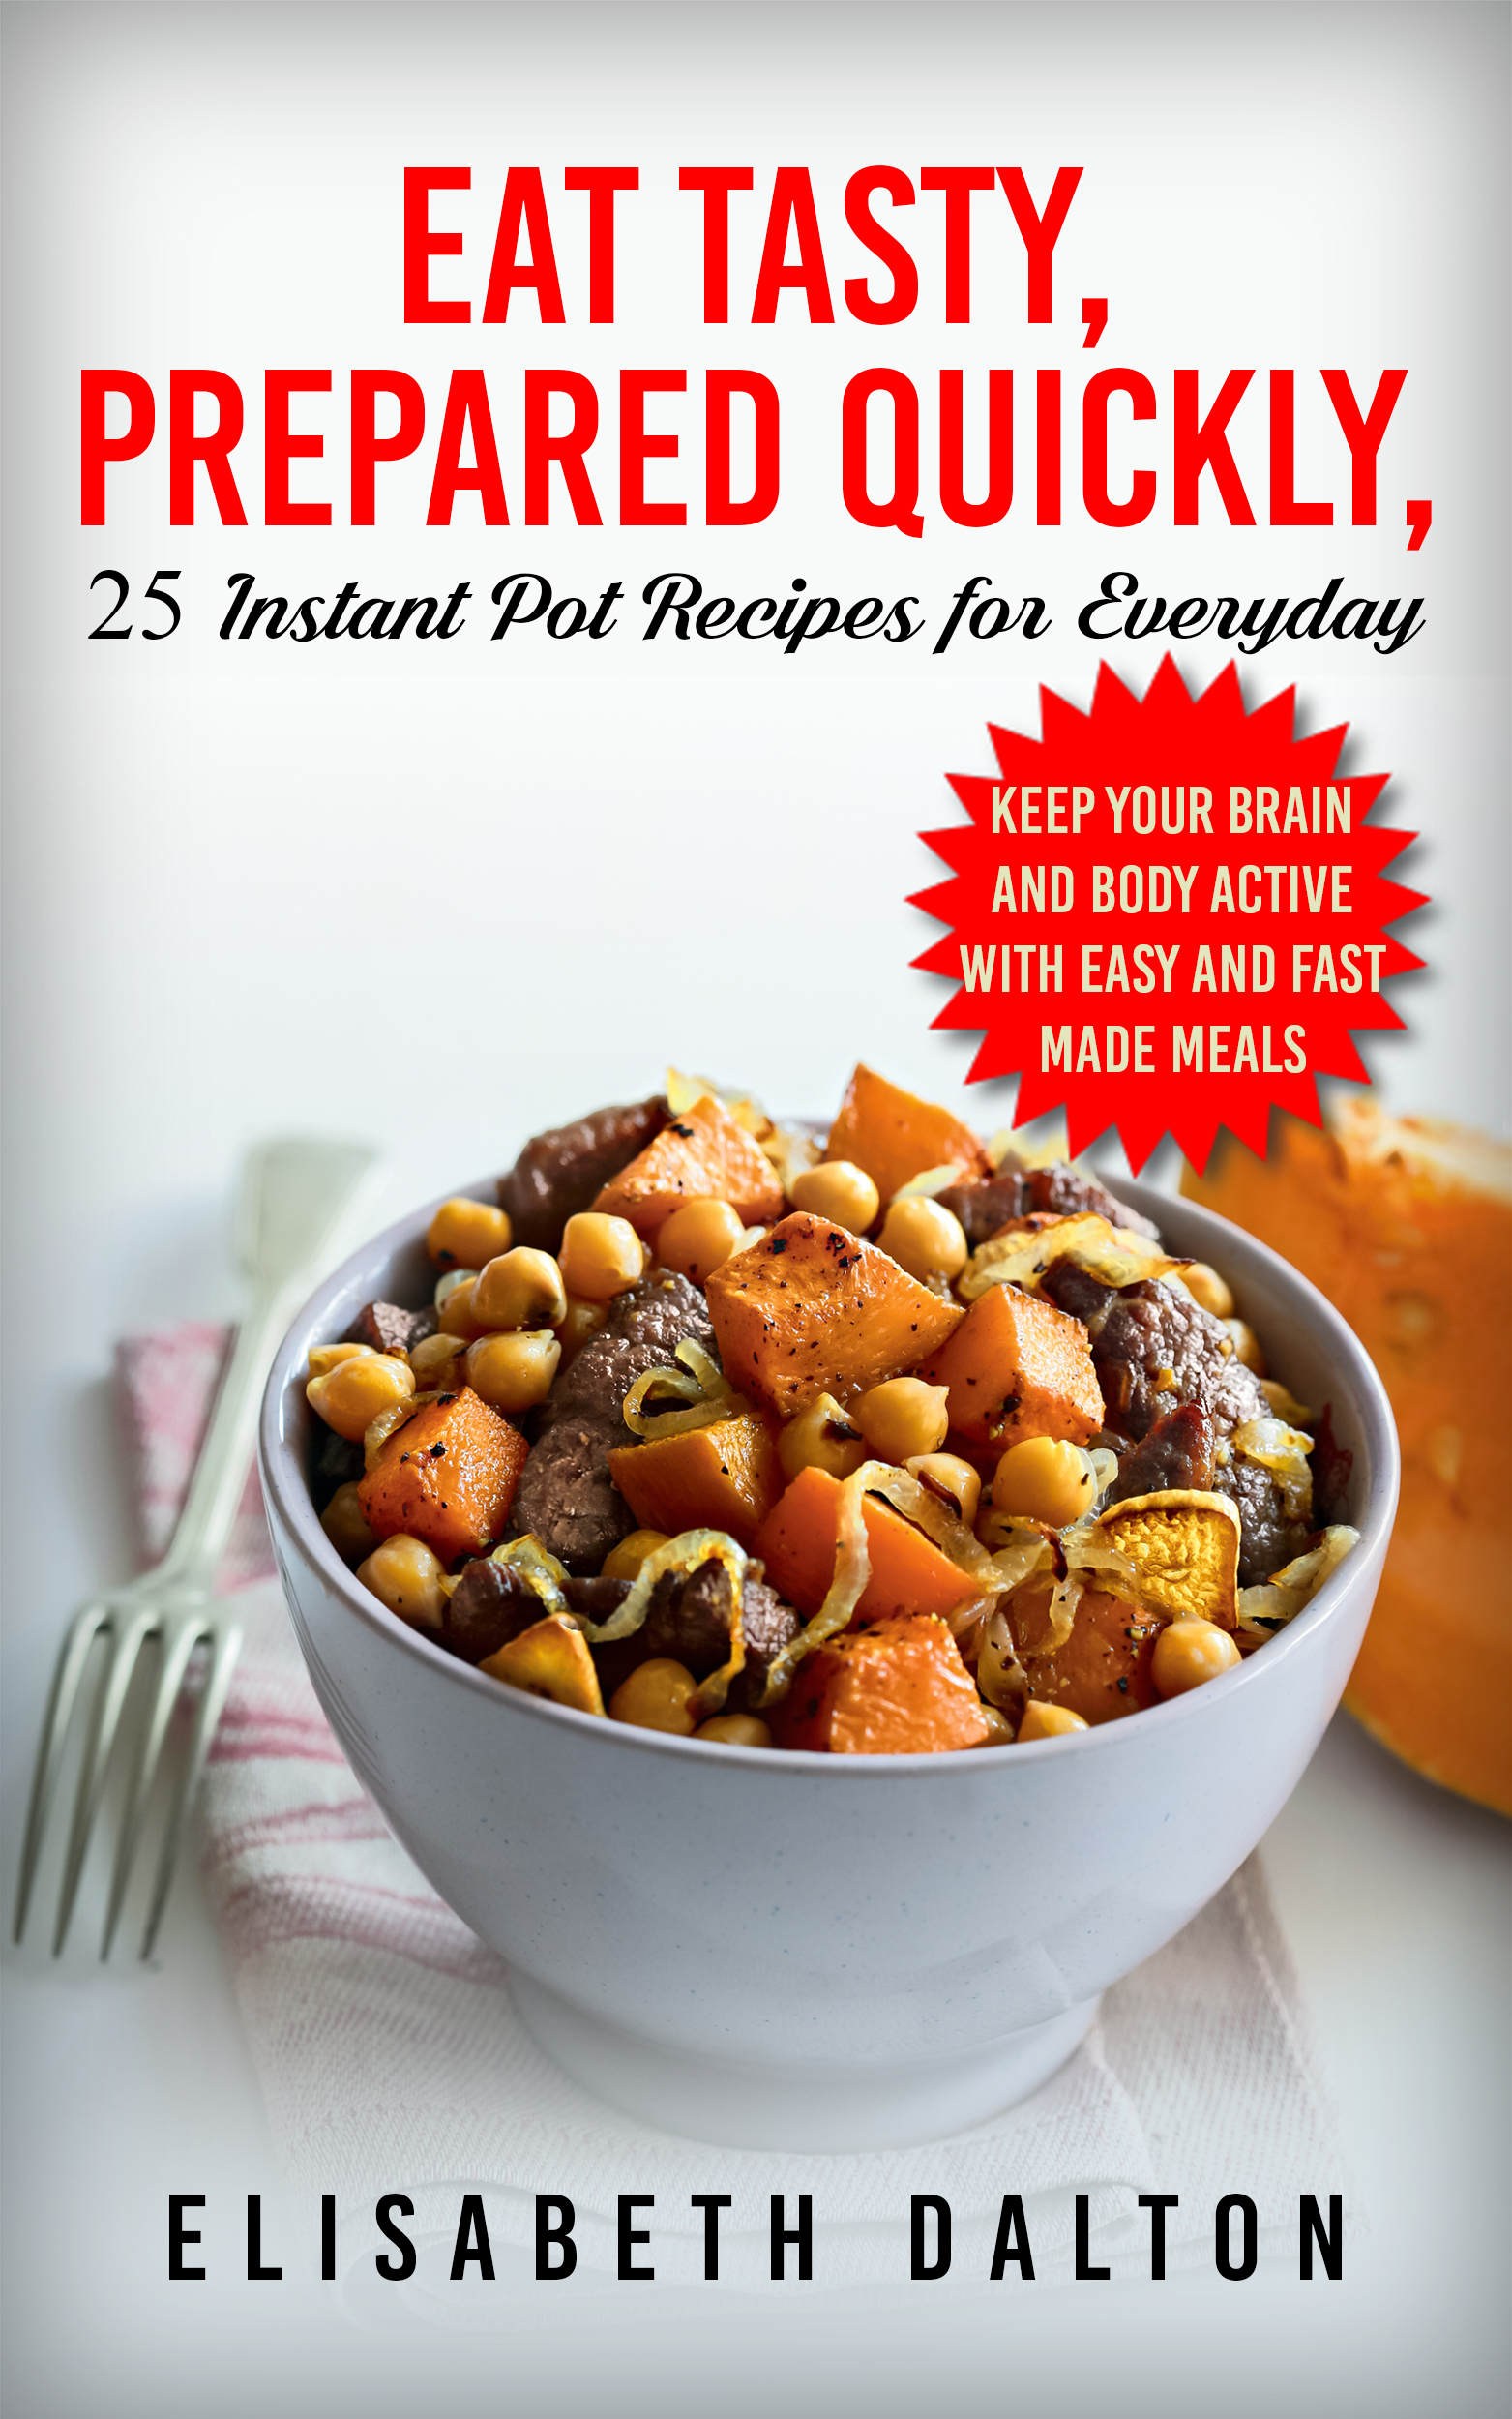 FREE: Eat Tasty, Prepared Quickly: 25 Instant Pot Recipes for Everyday by Elisabeth Dalton